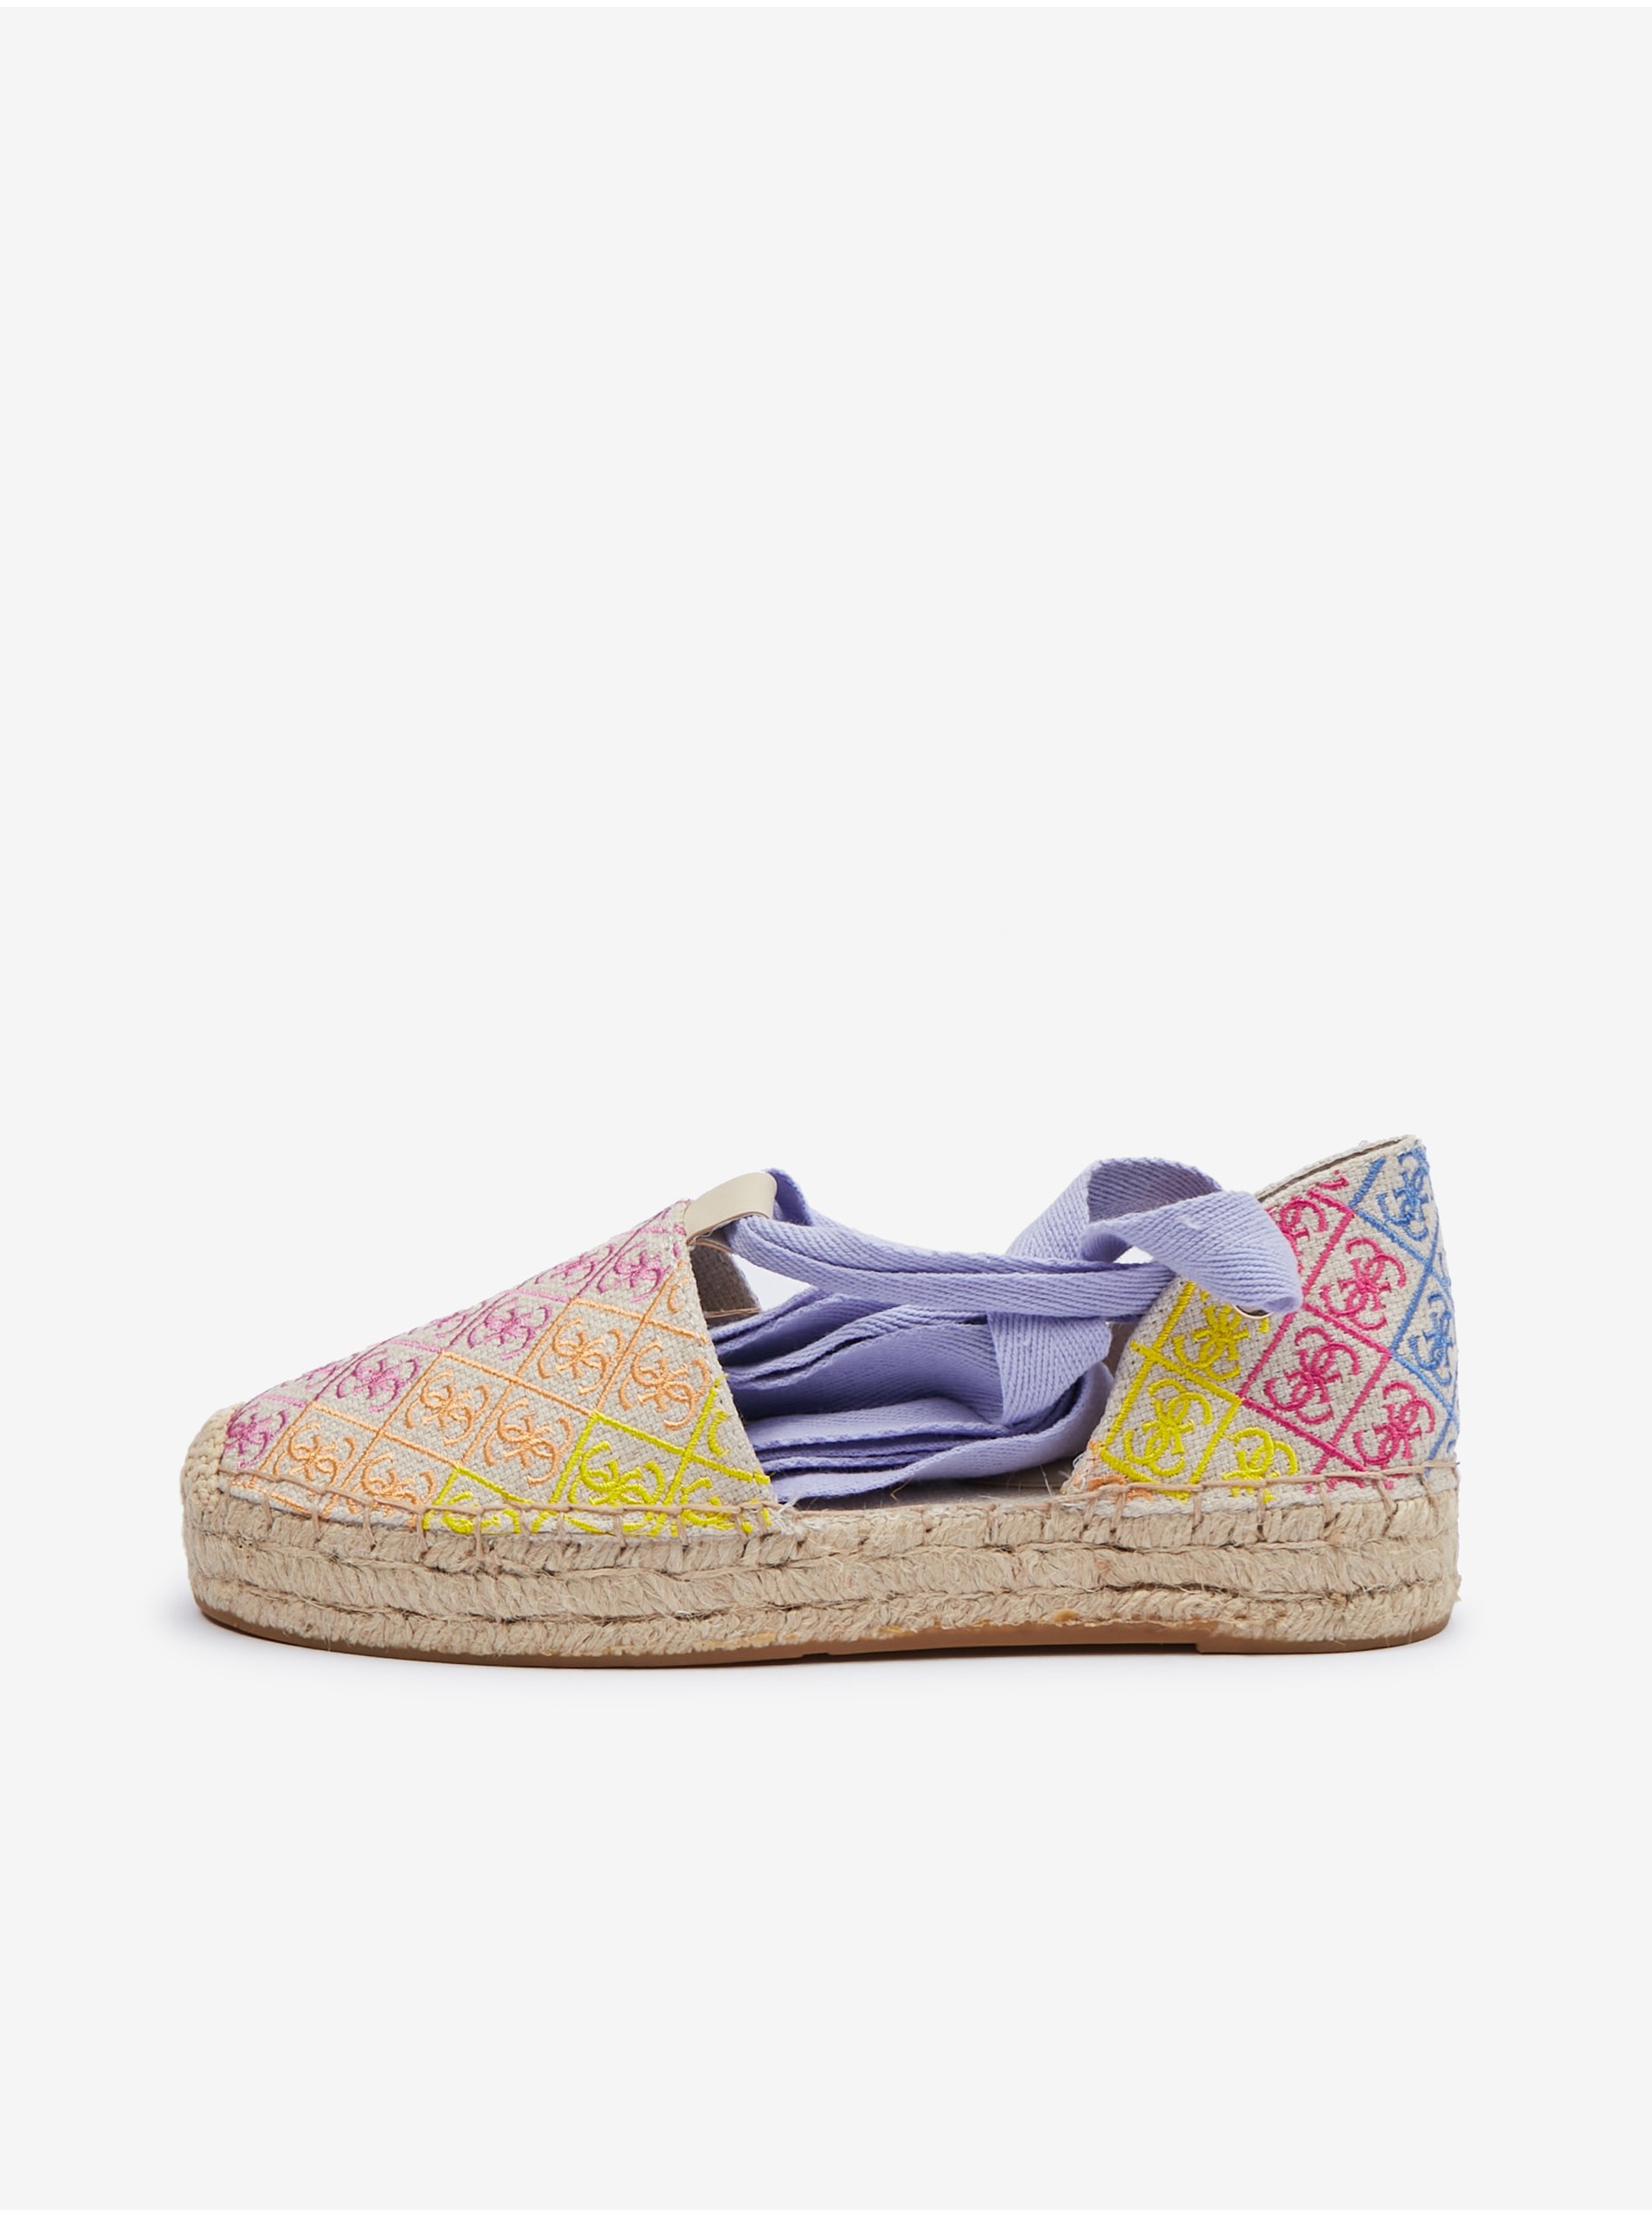 Pink-yellow Women's Patterned Espadrilles For Tying Guess Jalene 3 - Ladies